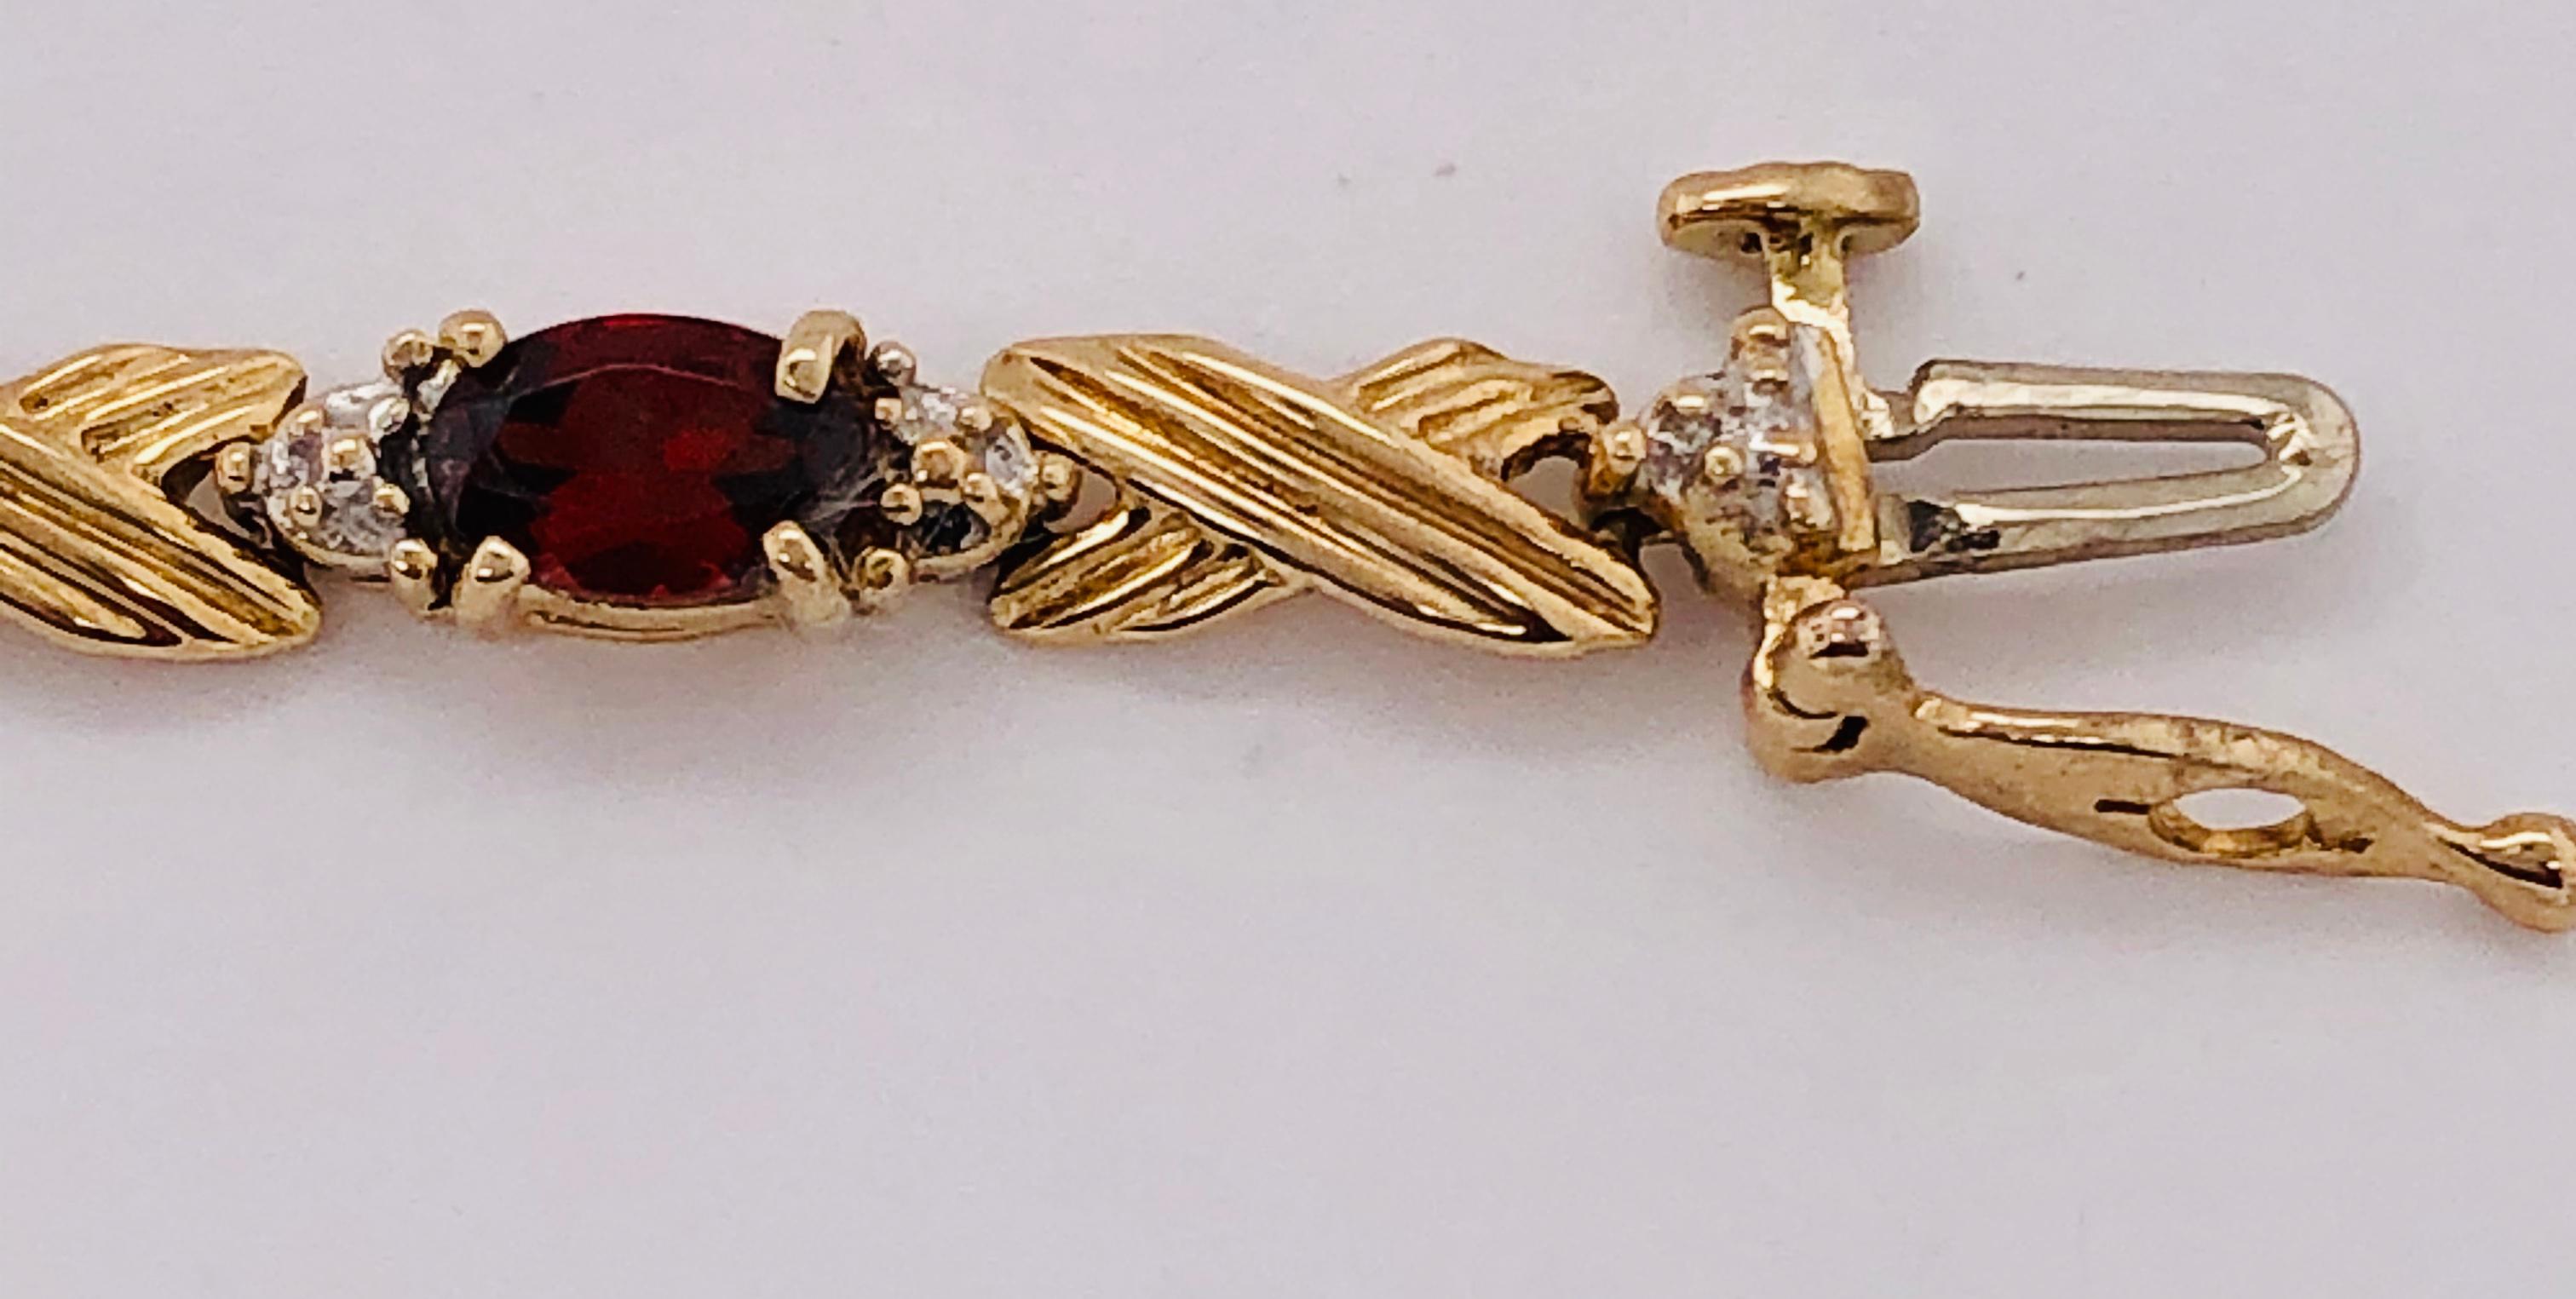 14 Karat Yellow Gold Braided Link Bracelet with Garnets and Diamond Accents For Sale 4